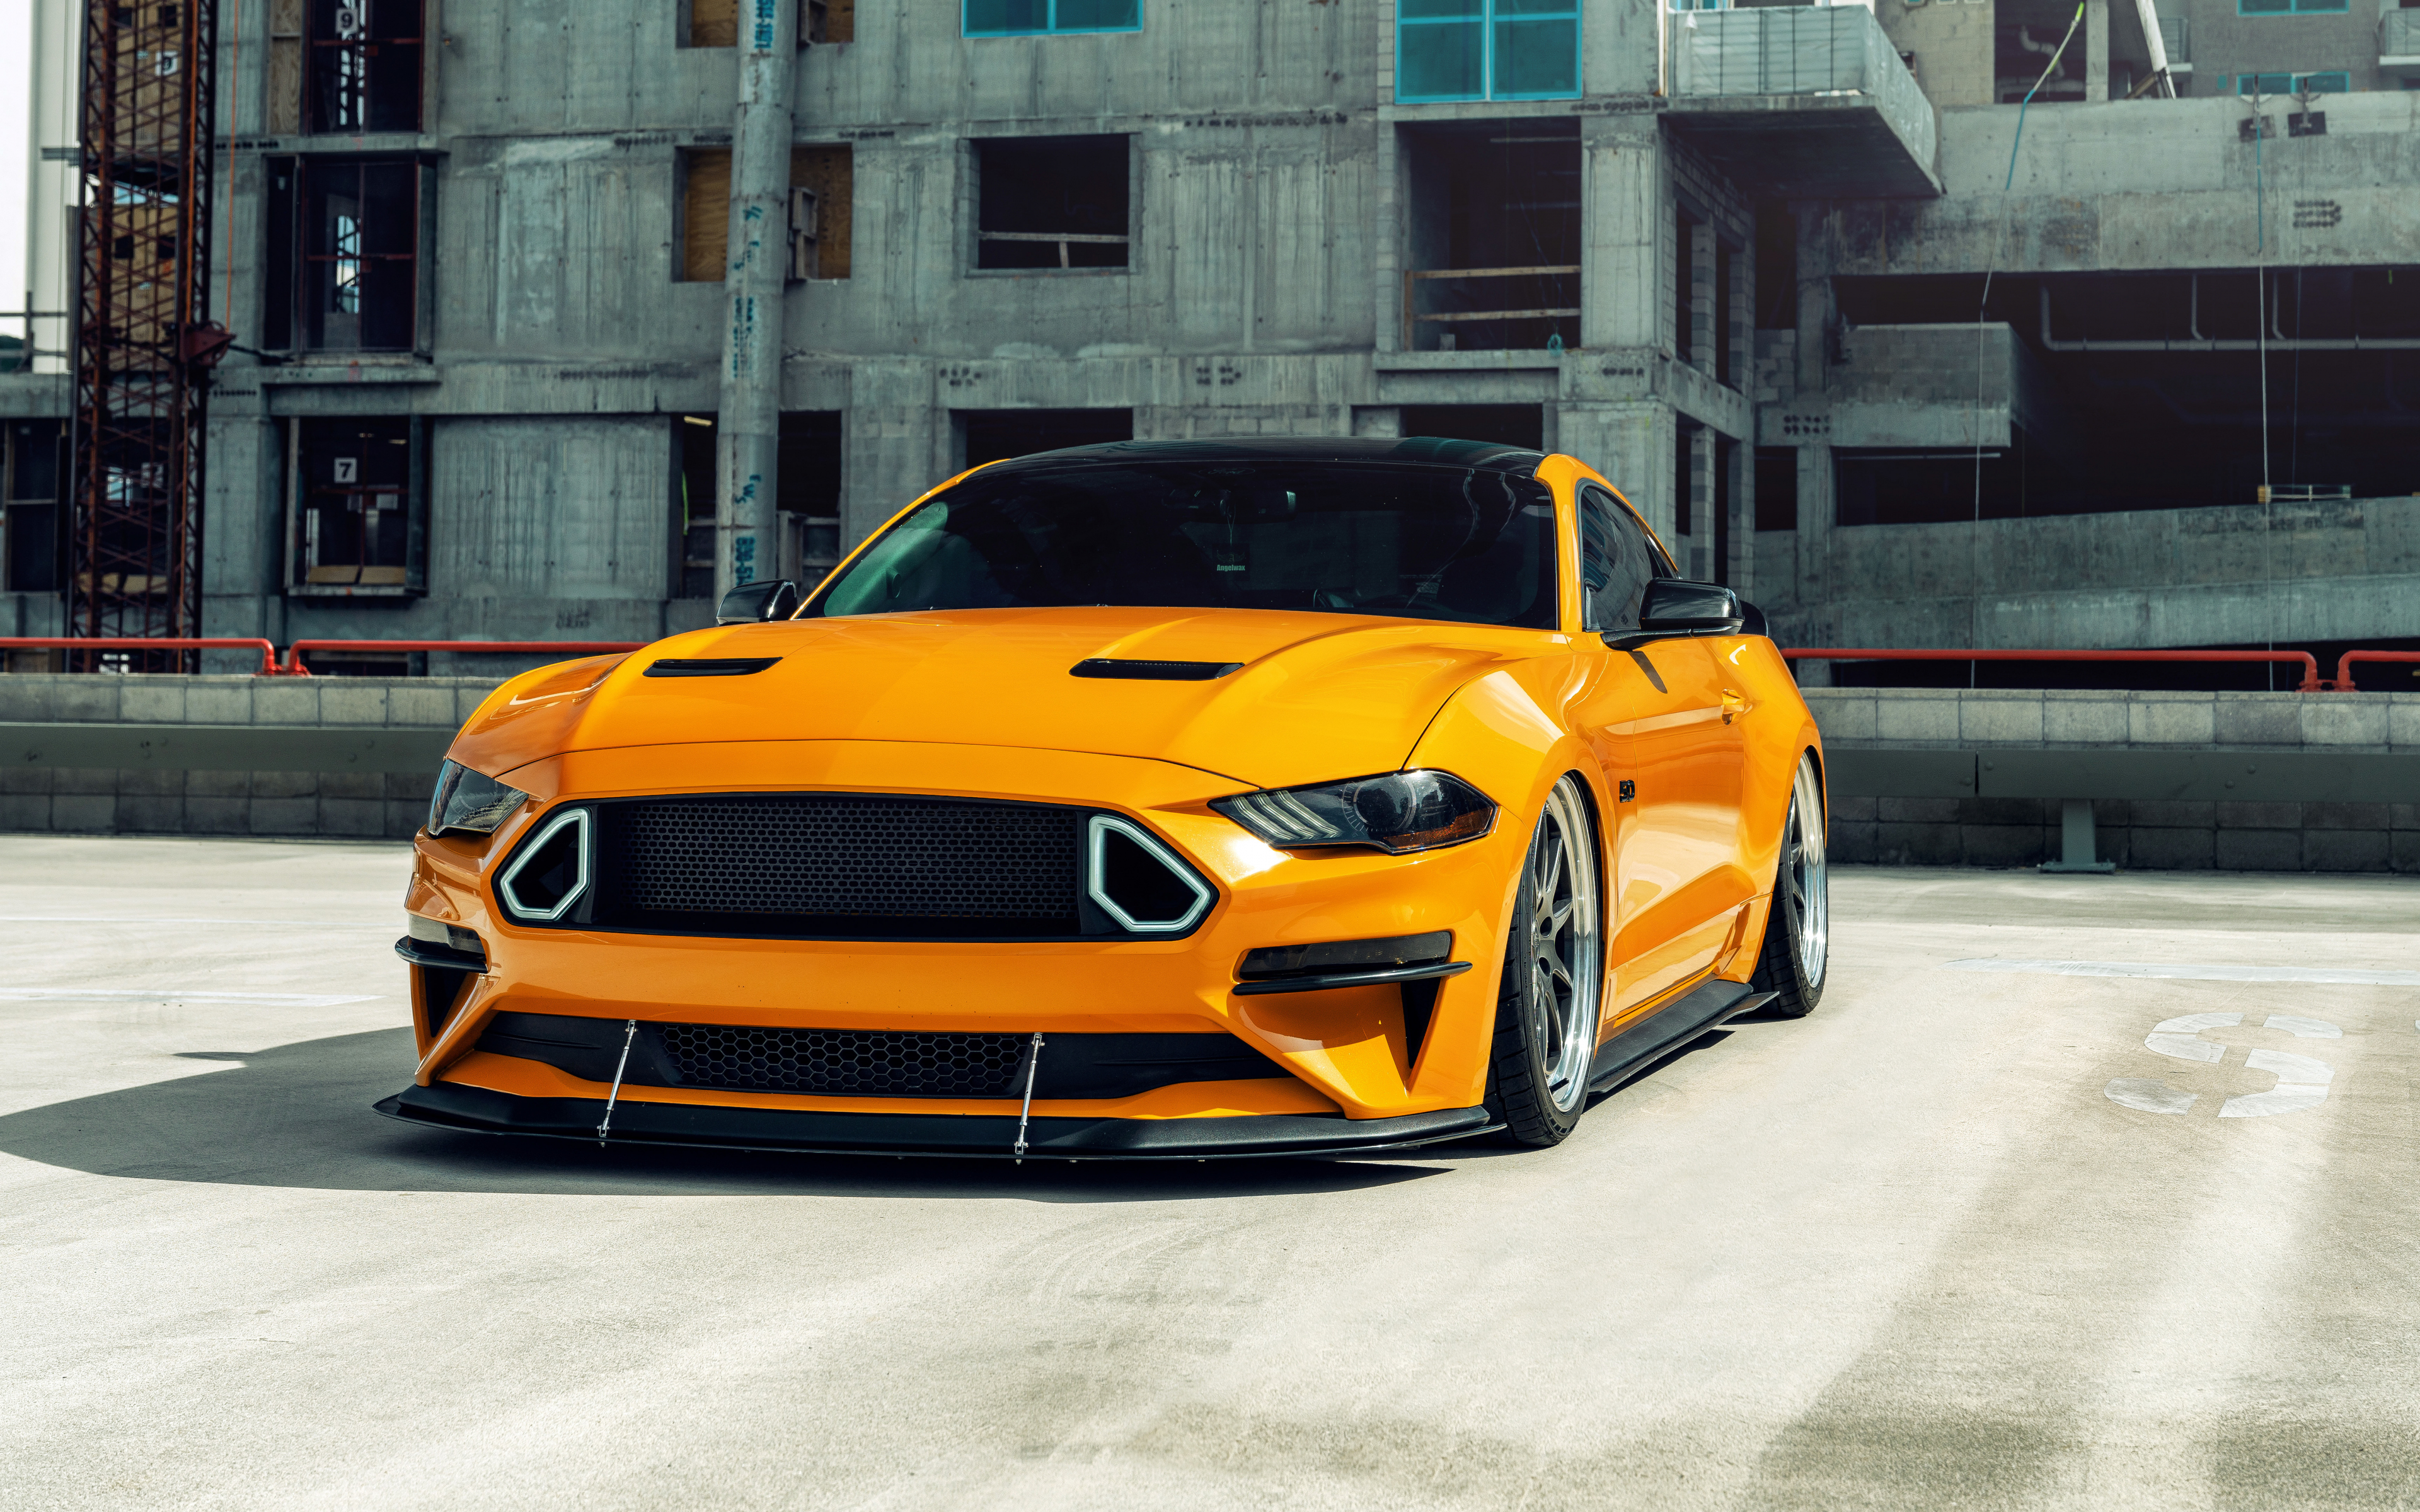 Yellow Ford Mustang GT, 2020, 3840x2400 wallpaper